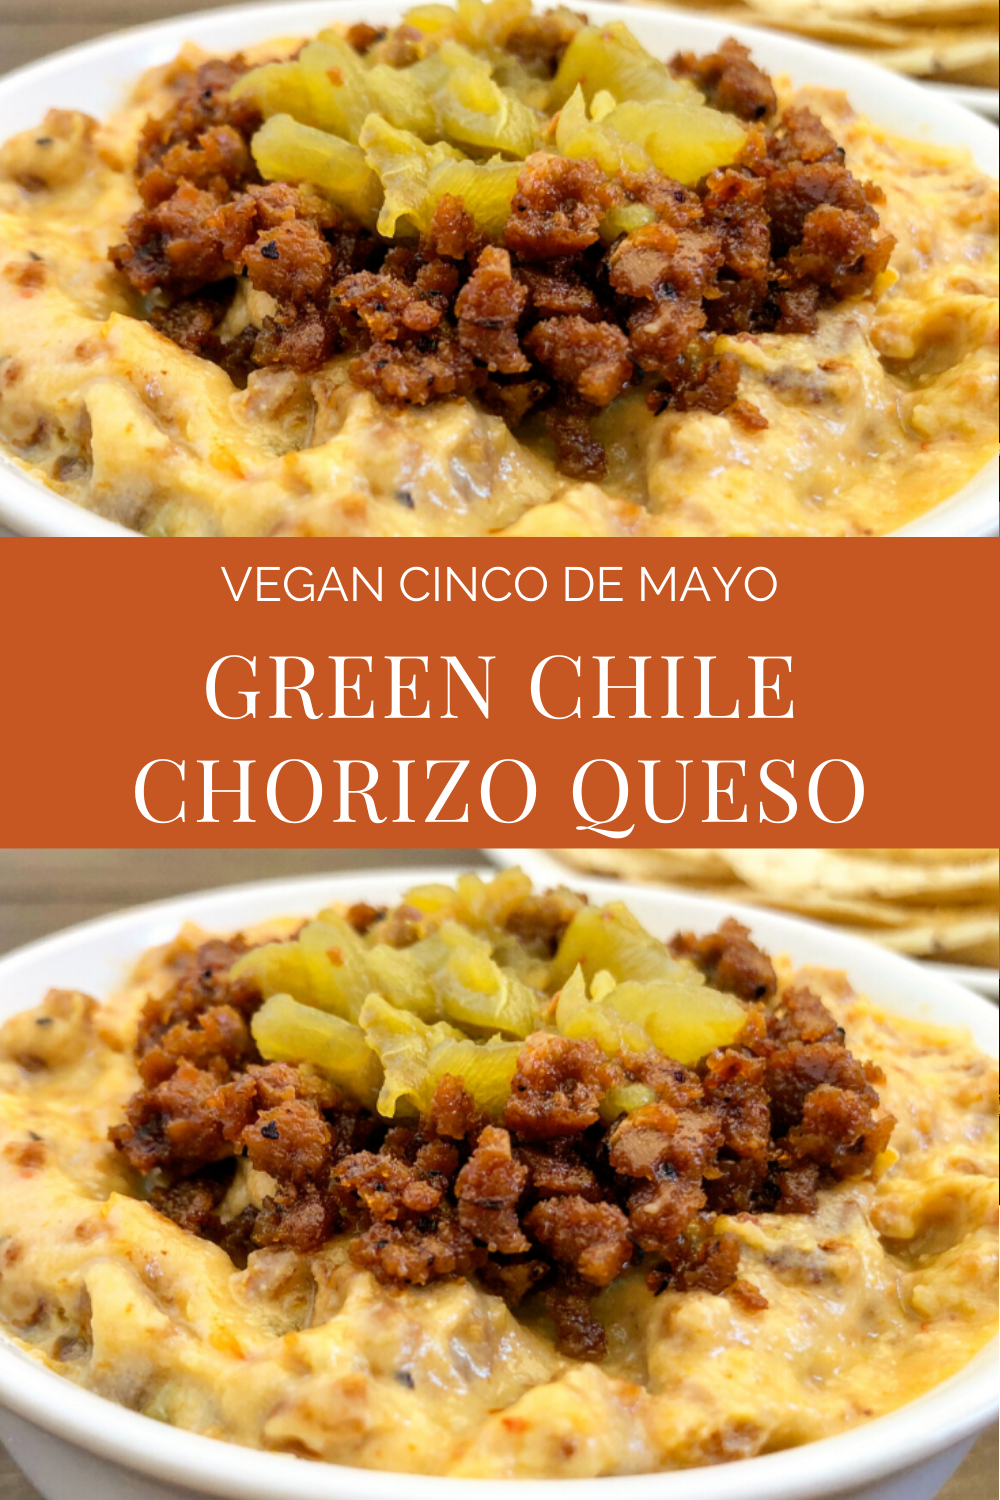 Vegan Green Chile & Chorizo Queso - Loaded with savory flavors of green chiles and chorizo, this hearty and easy to make dip is perfect for Game Day snacking!

#vegancincodemayo #veganqueso #veganmexicanrecipes #vegandip #thiswifecooksrecipes  via @thiswifecooks